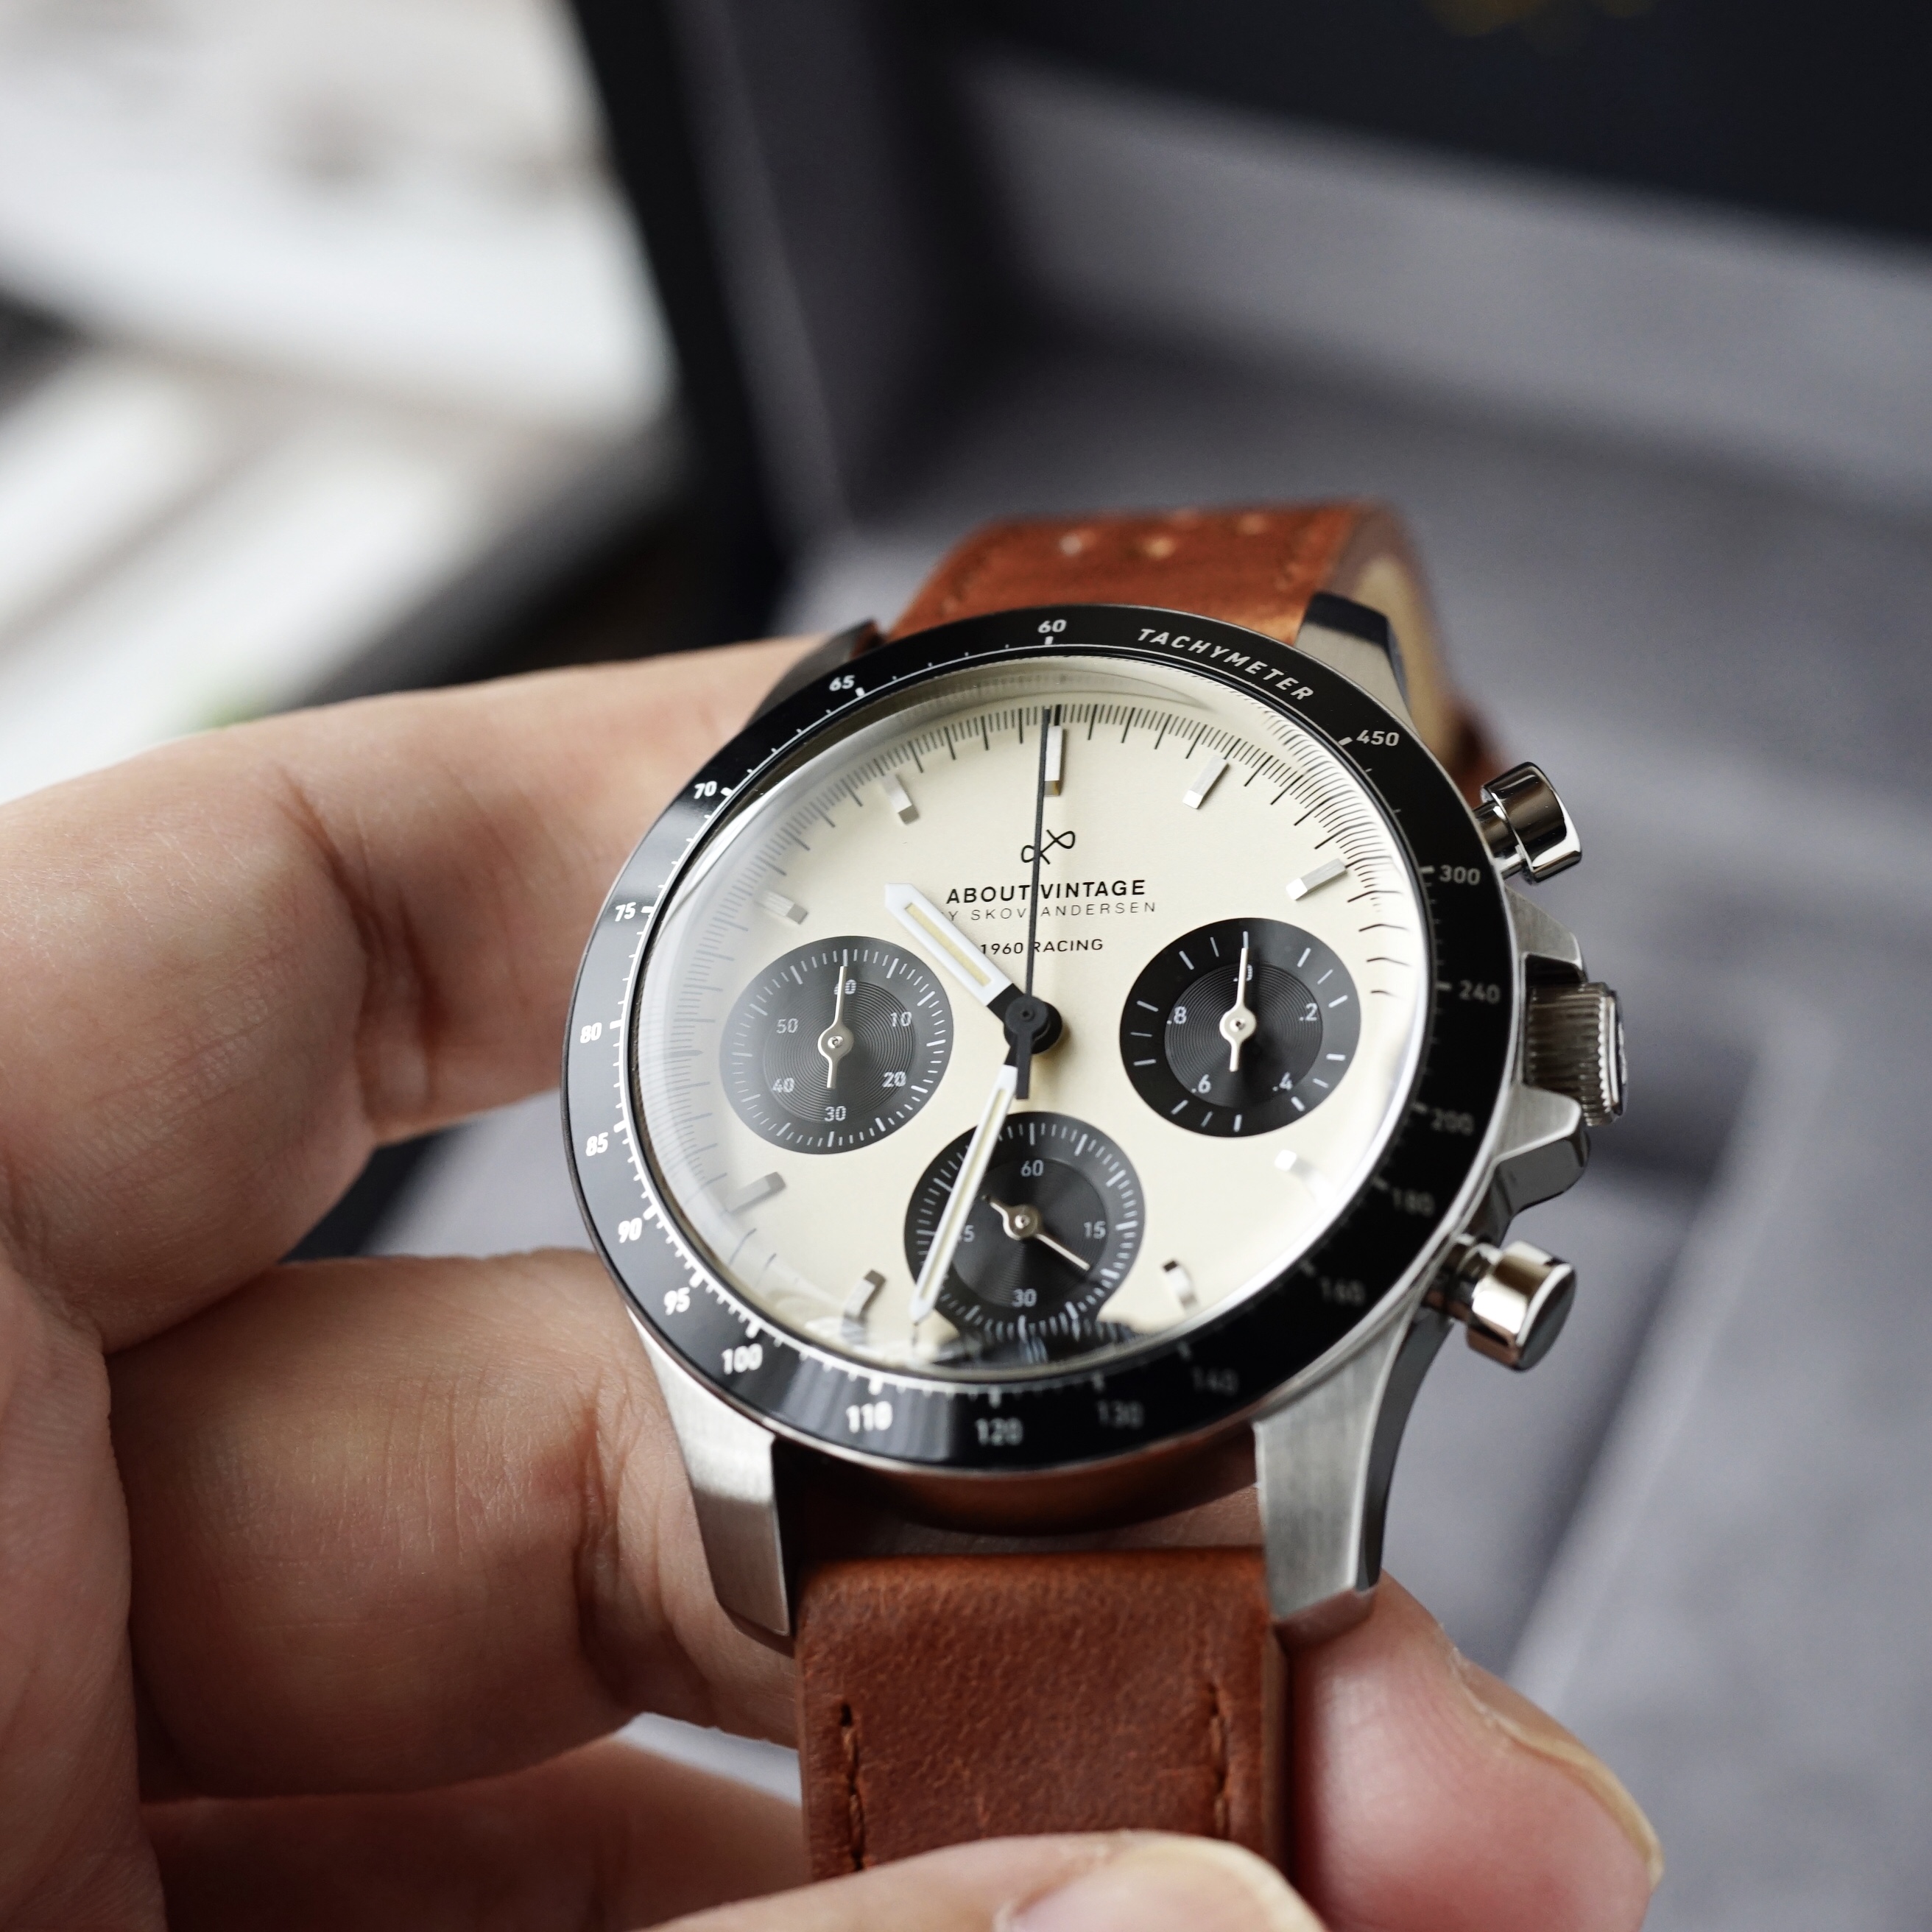 About Vintage 『1960』RACING CHRONOGRAPH イメージカット 26